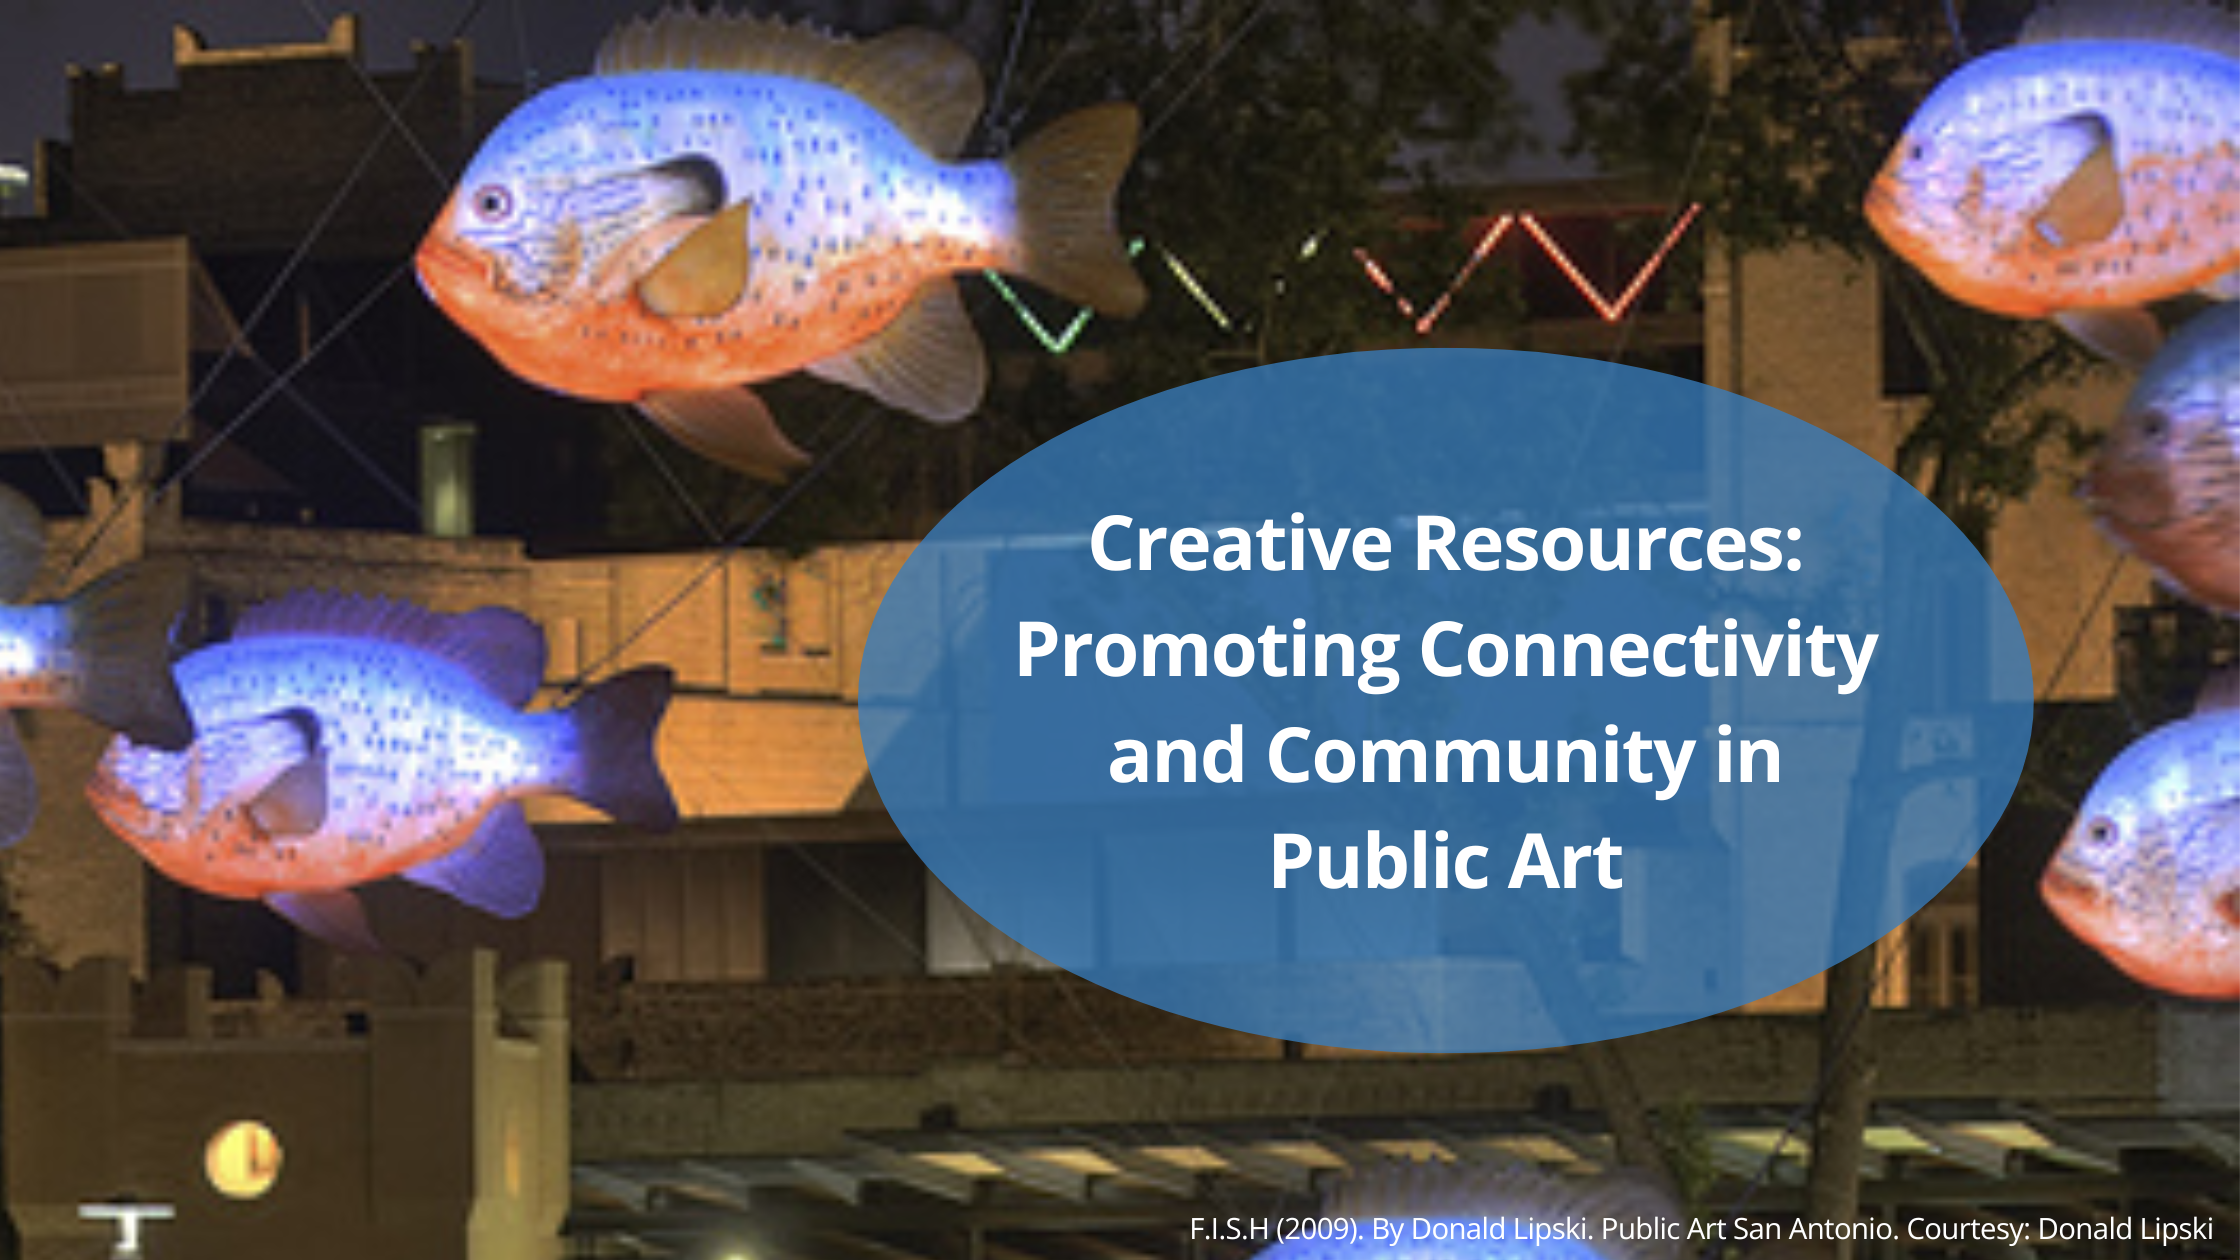 Creative Resources: Promoting Connectivity and Community in Public Art